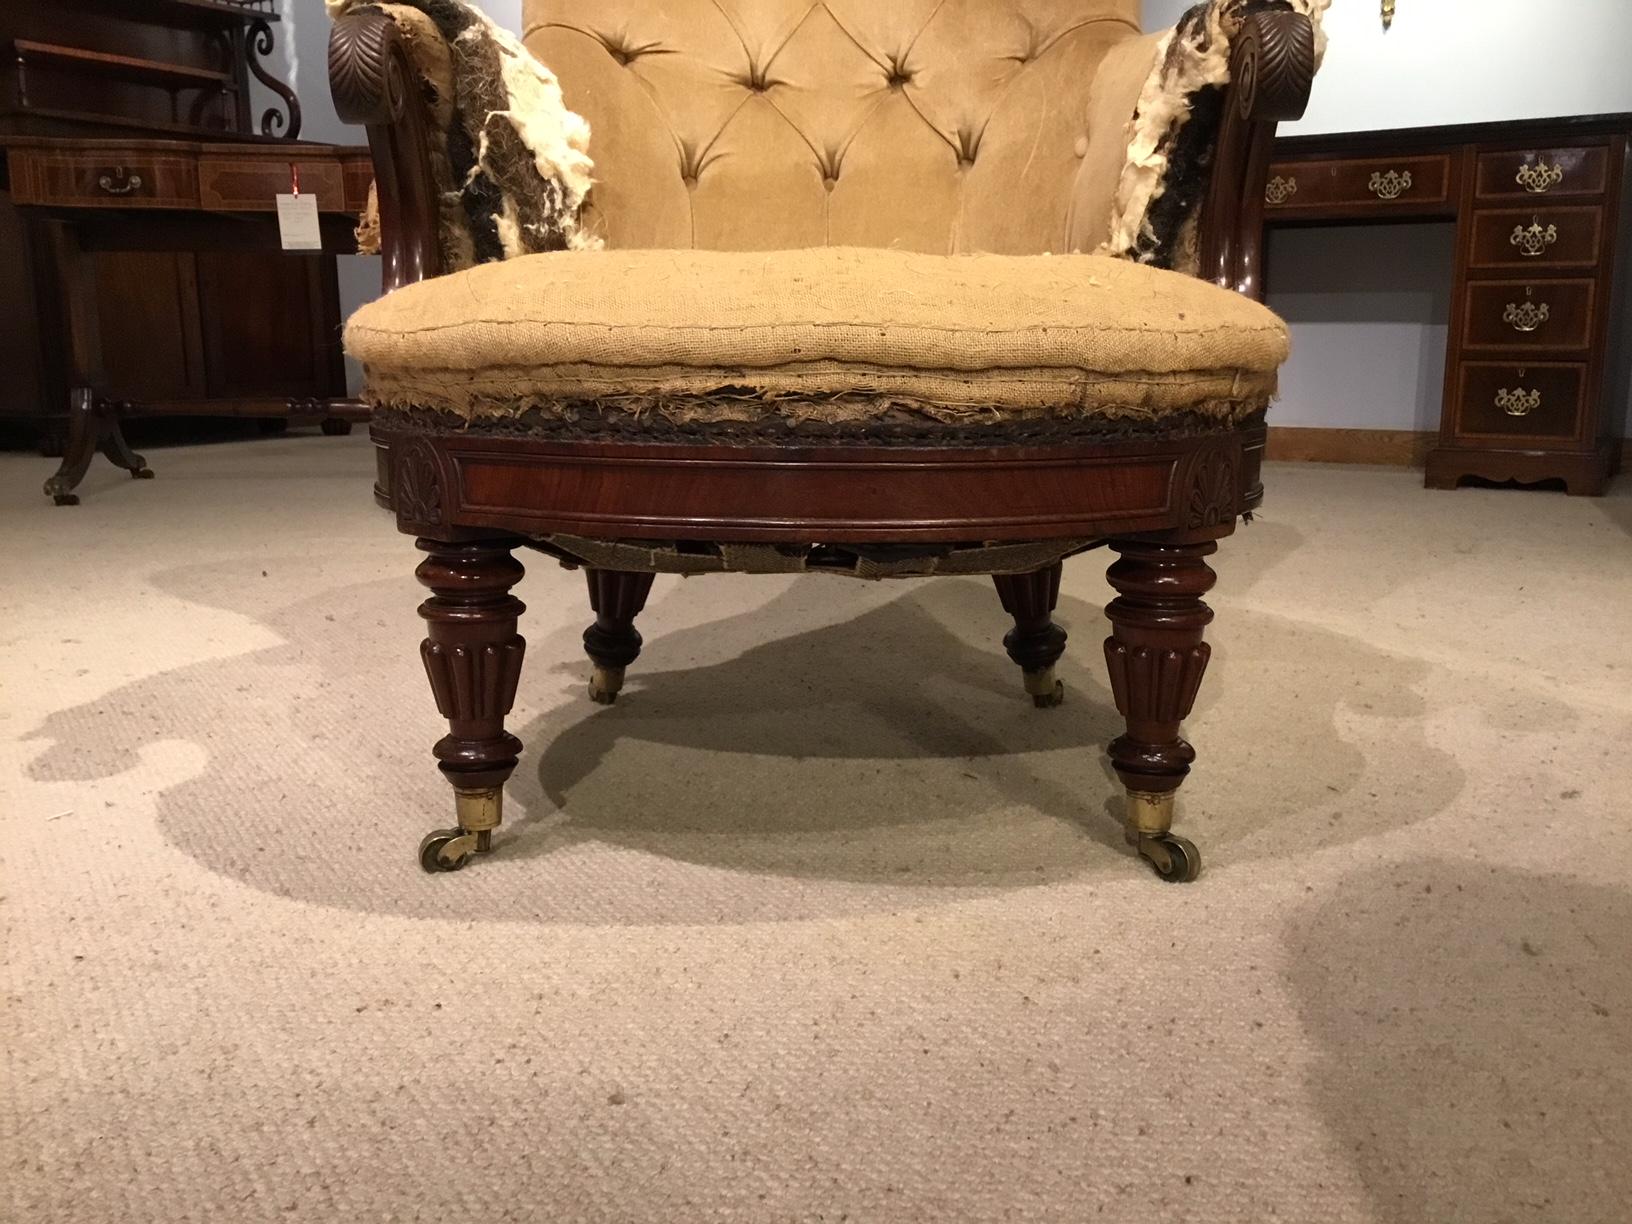 A fine quality mahogany Regency period library chair by Gillows of Lancaster. The deep buttoned back with rolled arms and finely carved knuckles, with a generous sprung seat. Supported on four finely turned and reeded supports with brass cup castors